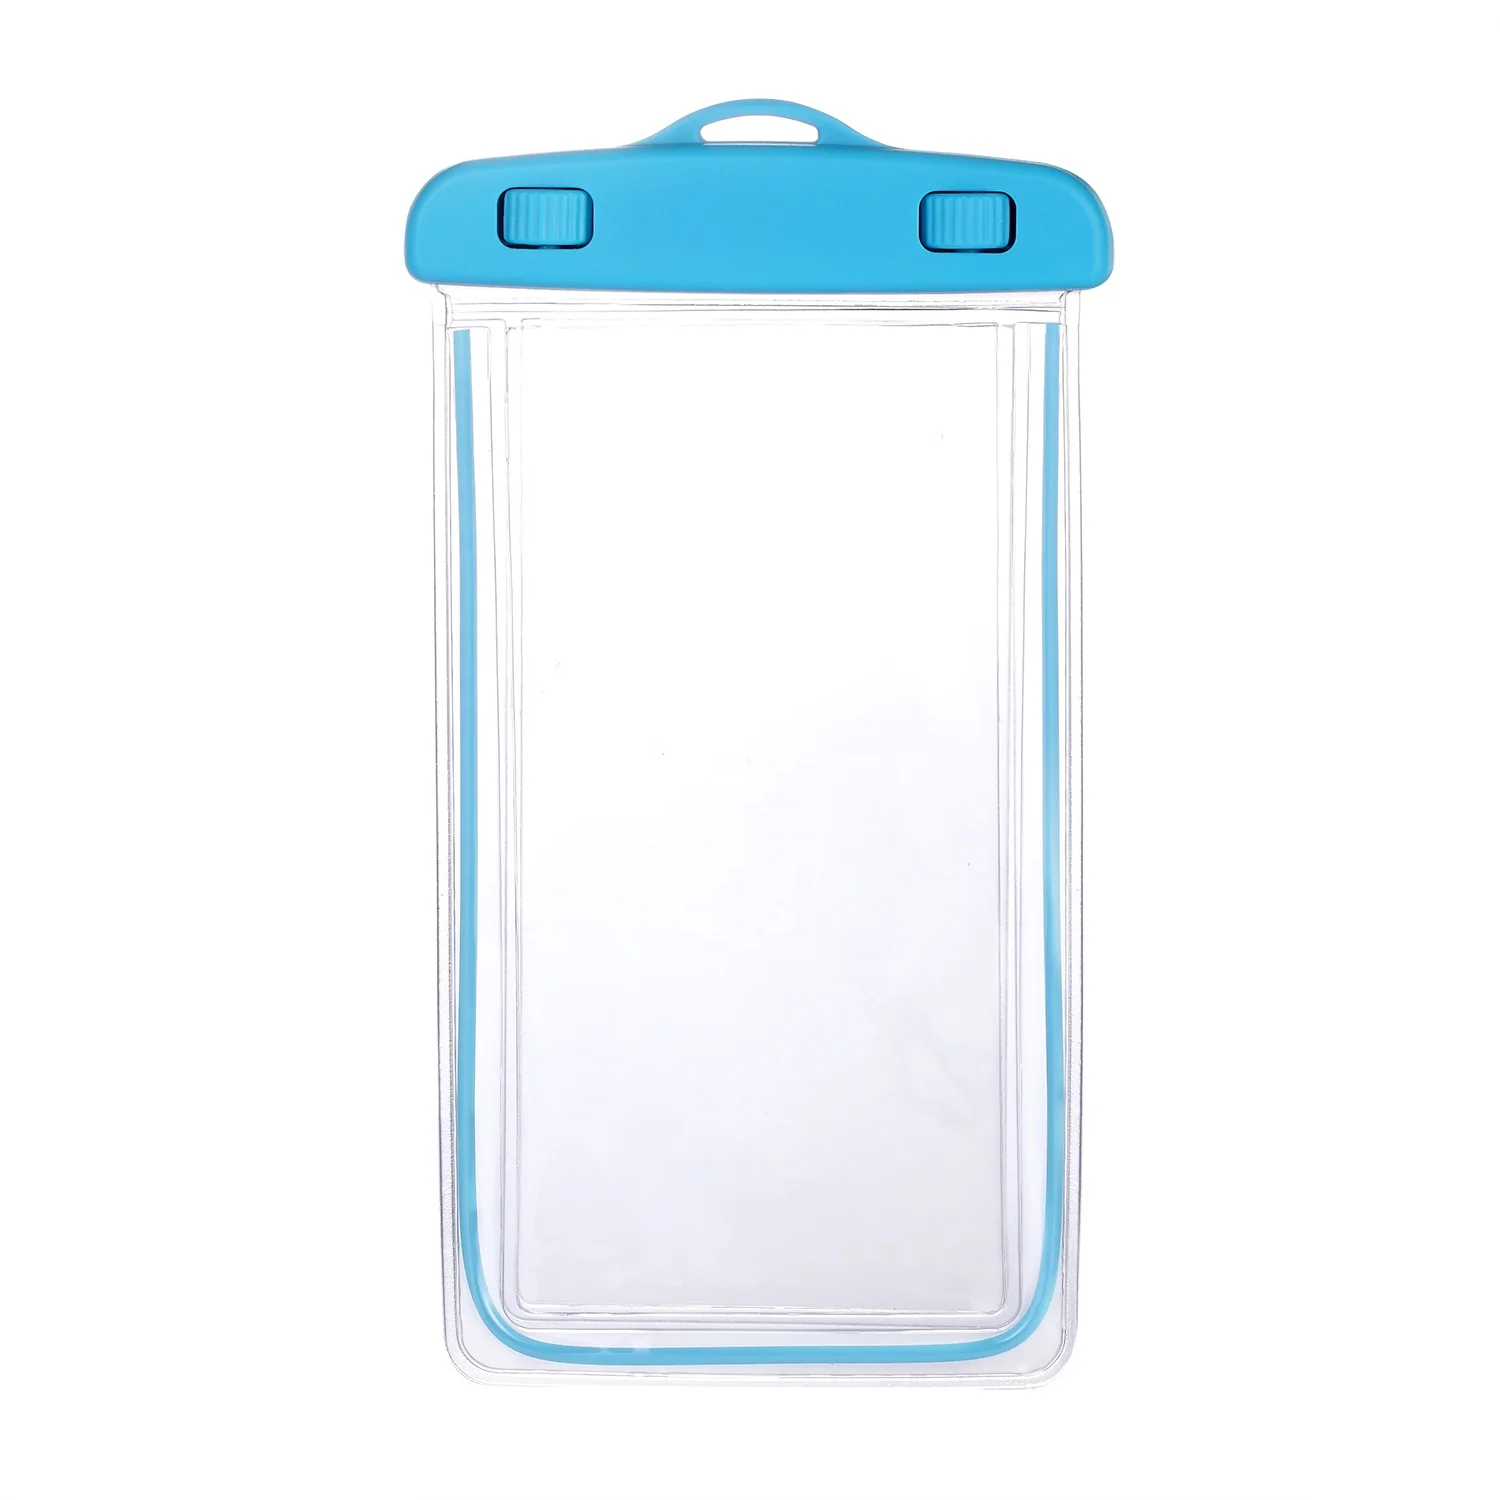 

Yuanfeng Ipx8 pvc waterproof dry bag best underwater phone pouch, Blue, pink, green, orange,white,black or customized